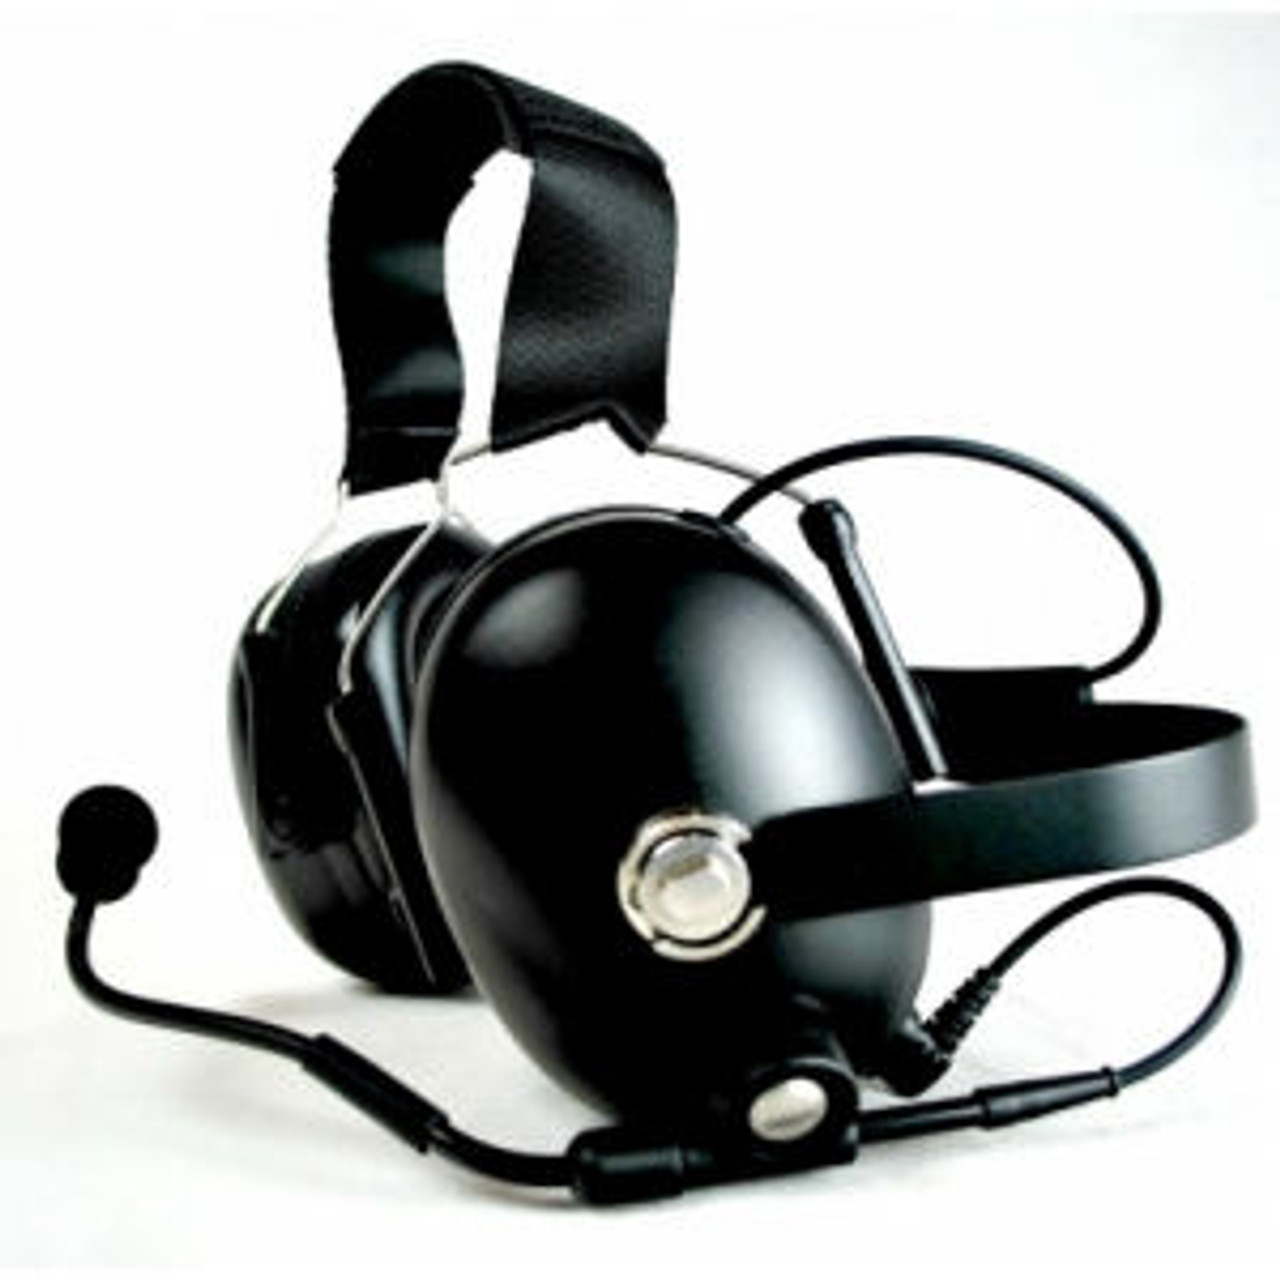 M/A-Com P5370 Noise Canceling Double Muff Behind The Head Headset